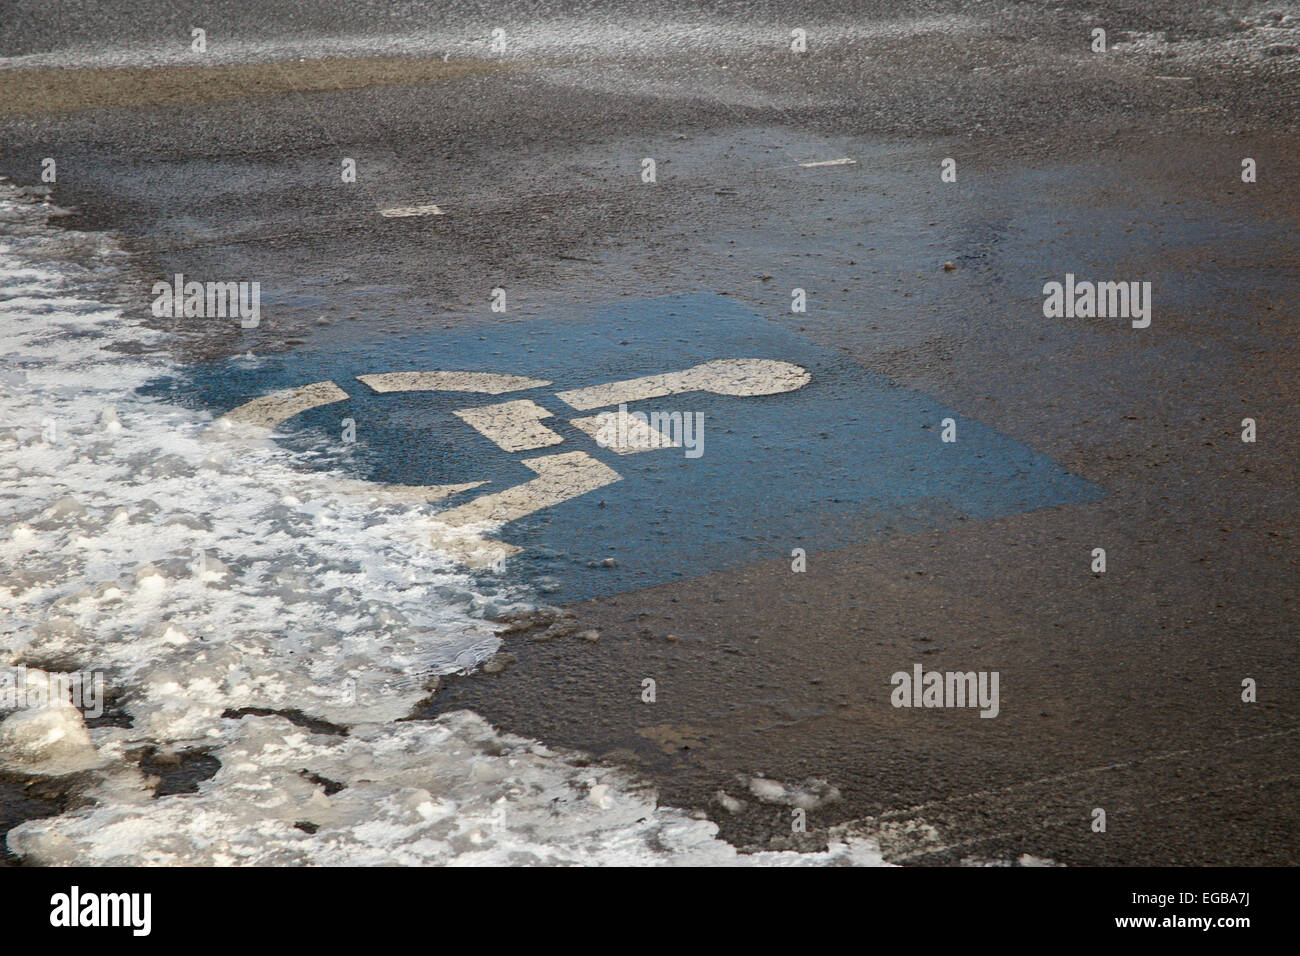 Handicap only parking symbol on snowy parking space. Stock Photo